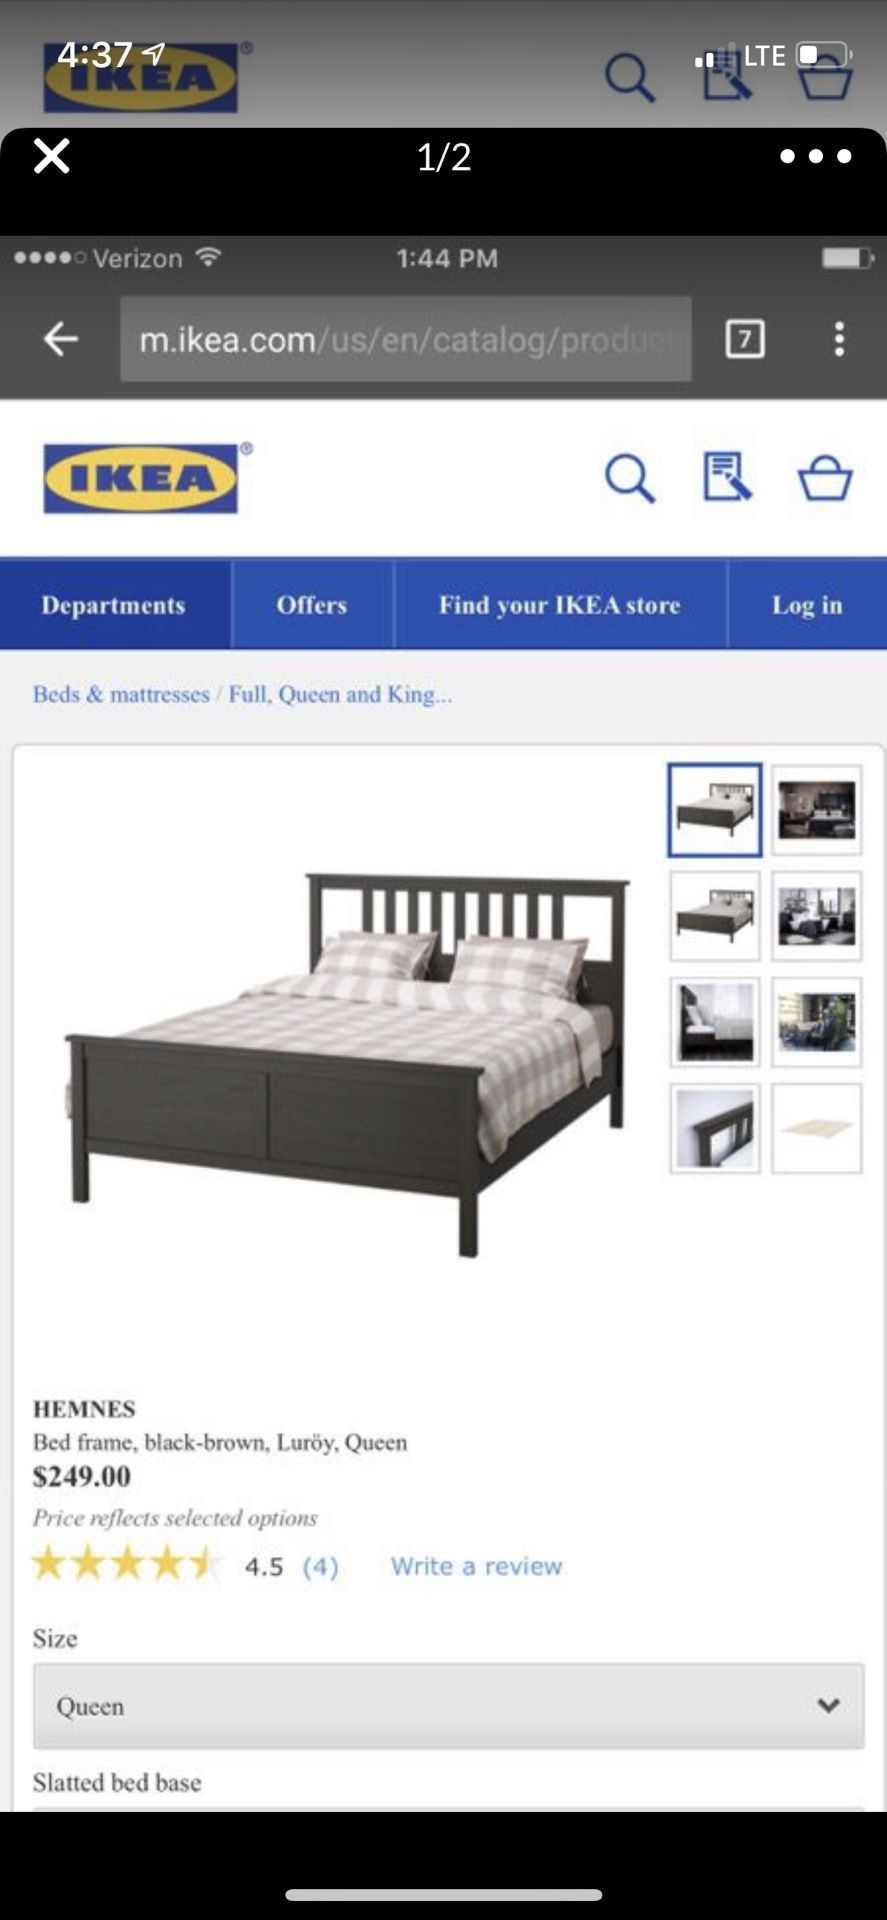 Hemnes bed frame black-brown. Moving out of town. Send me an offer!